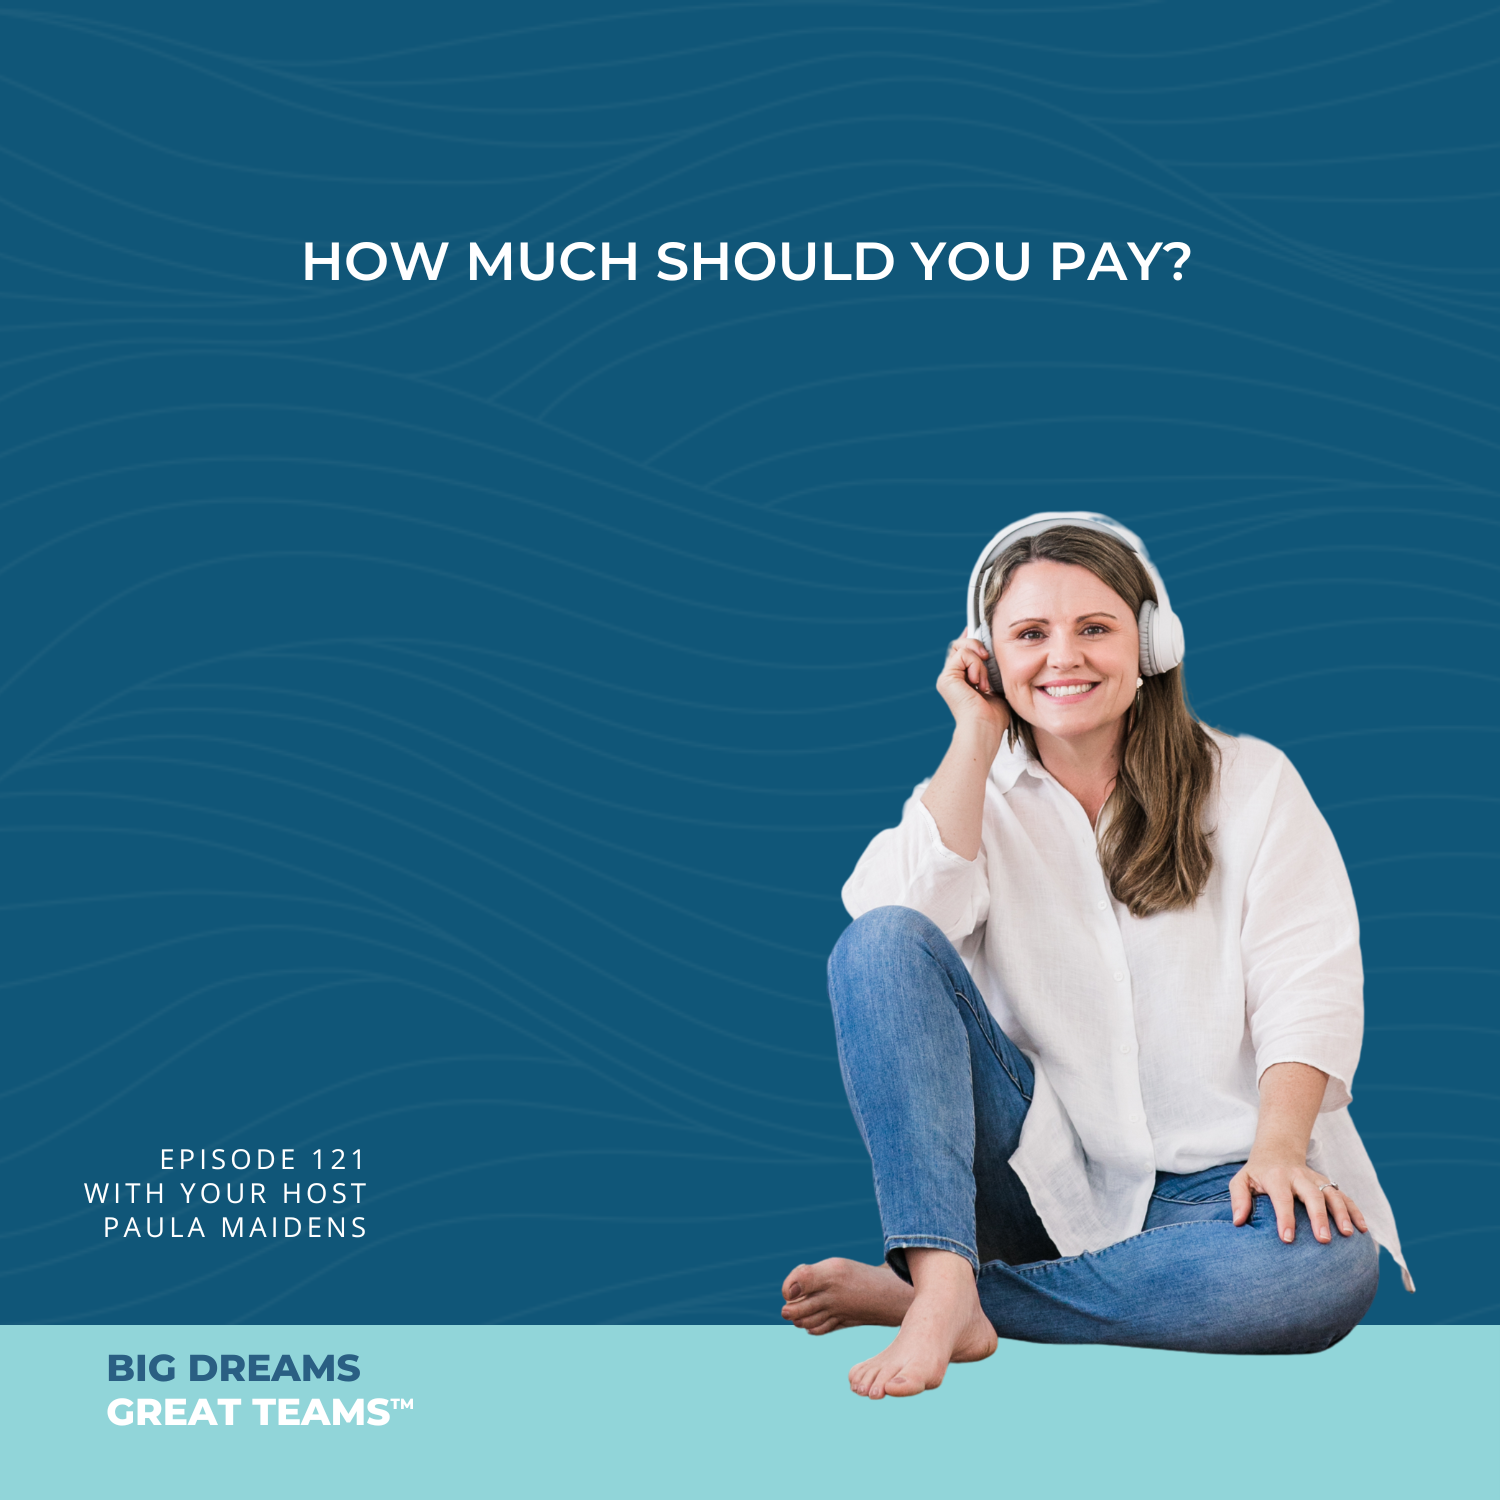 How much should you pay?